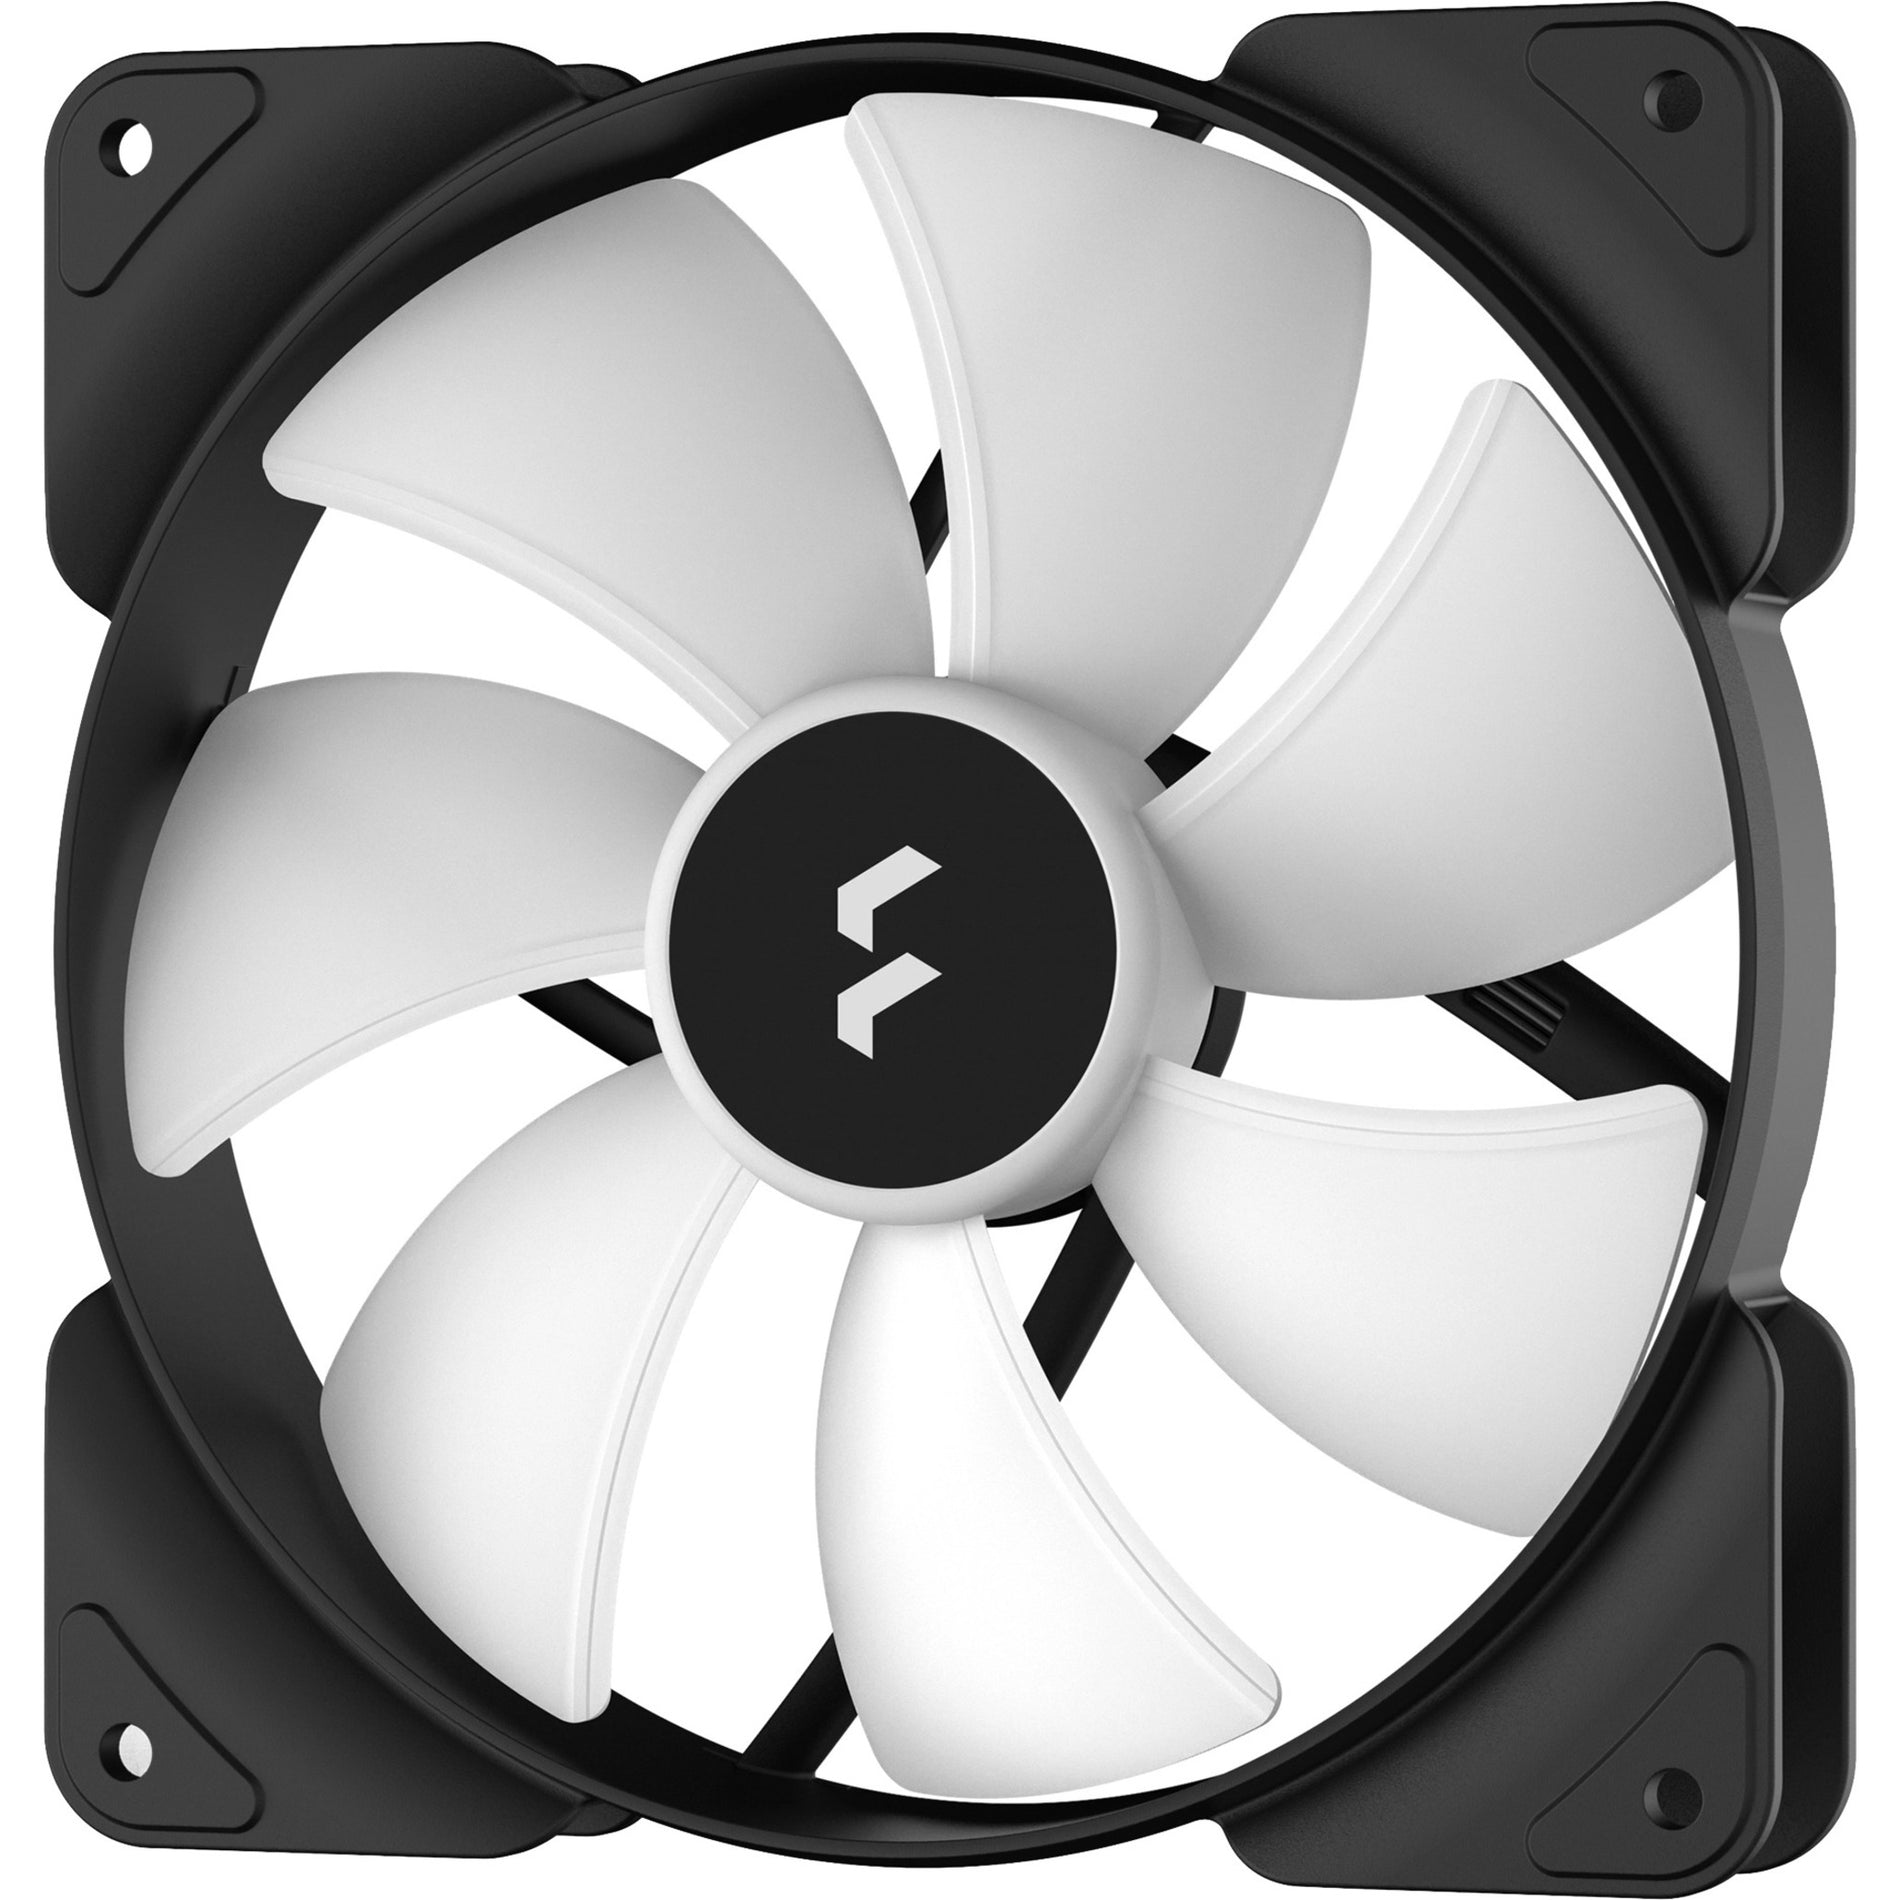 Fractal Design FD-F-AS1-1407 Aspect 14 RGB PWM Cooling Fan - 3 Pack, High Airflow, ARGB LED, Quiet Operation